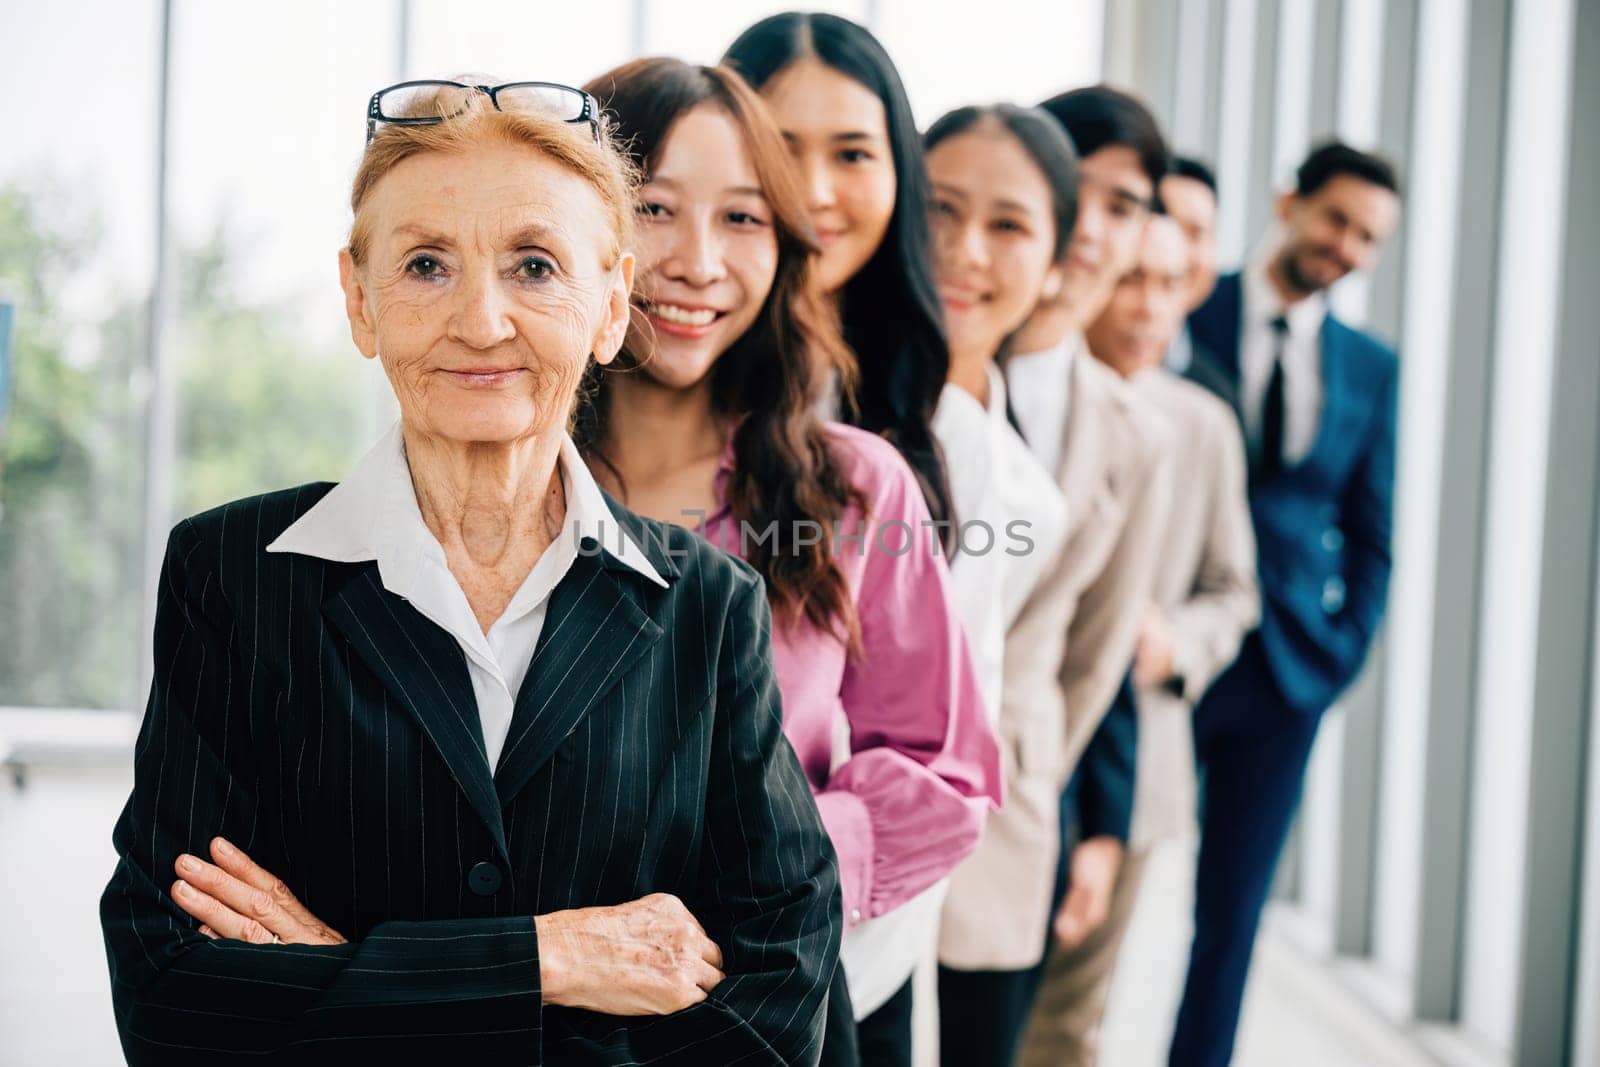 Young businesspeople and senior woman confidently looking camera in the office symbolize thriving business team with crossed arms. Their unity and commitment to success shine through in their startup.